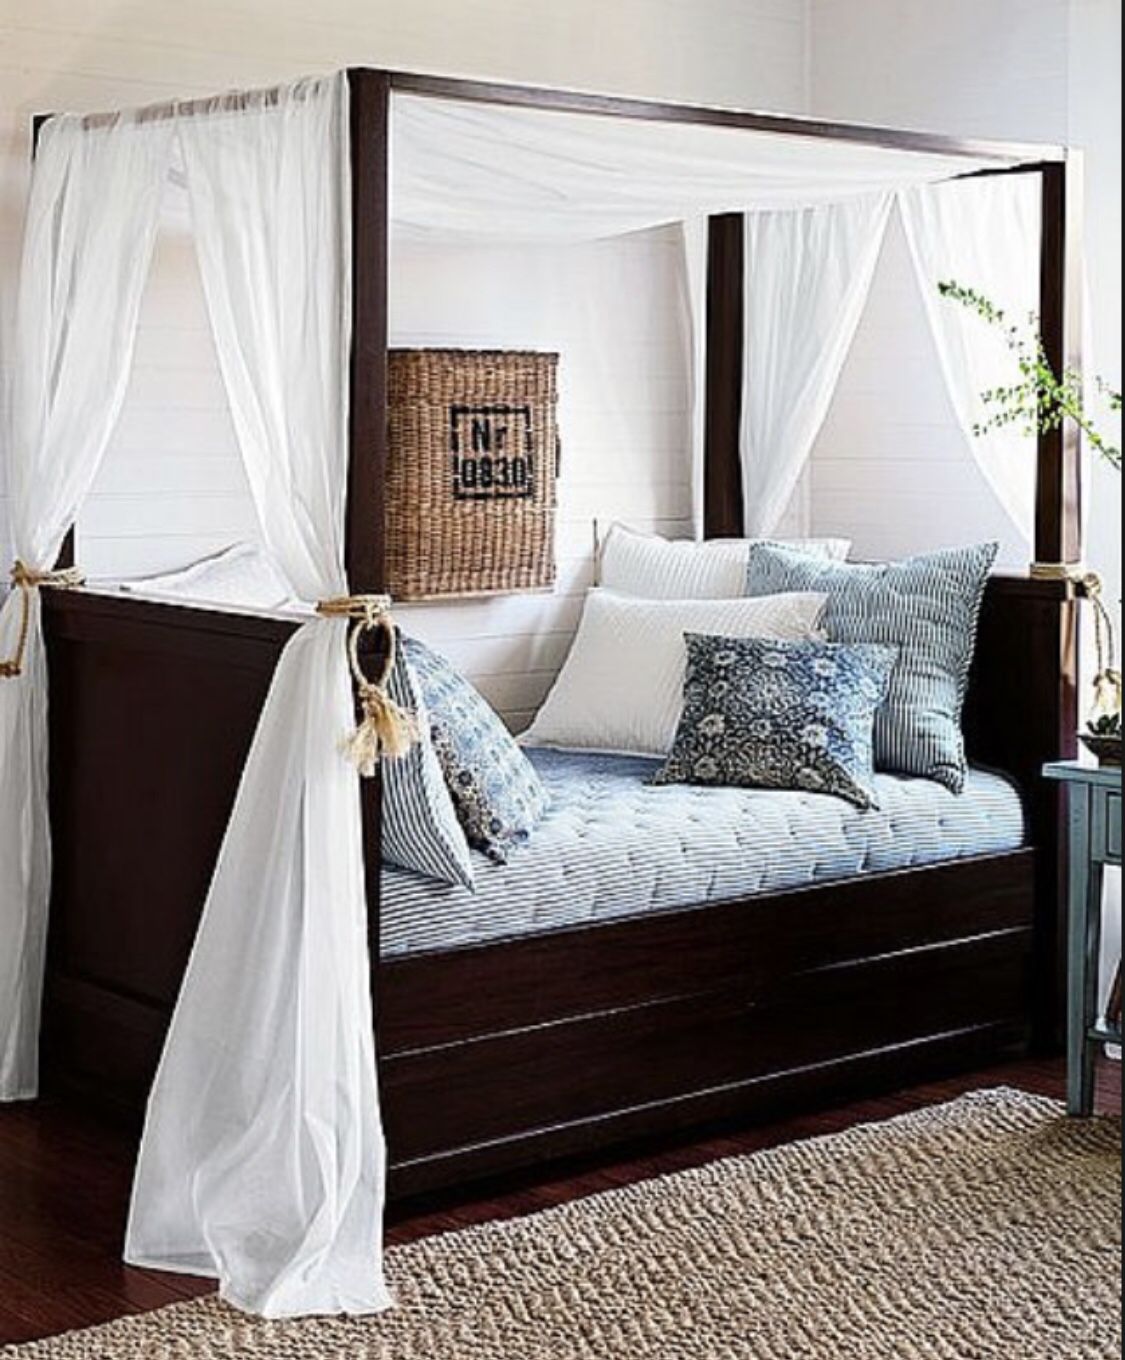 Twin Size Canopy Bed Daybed With Slats Potterybarn Farmhouse Style